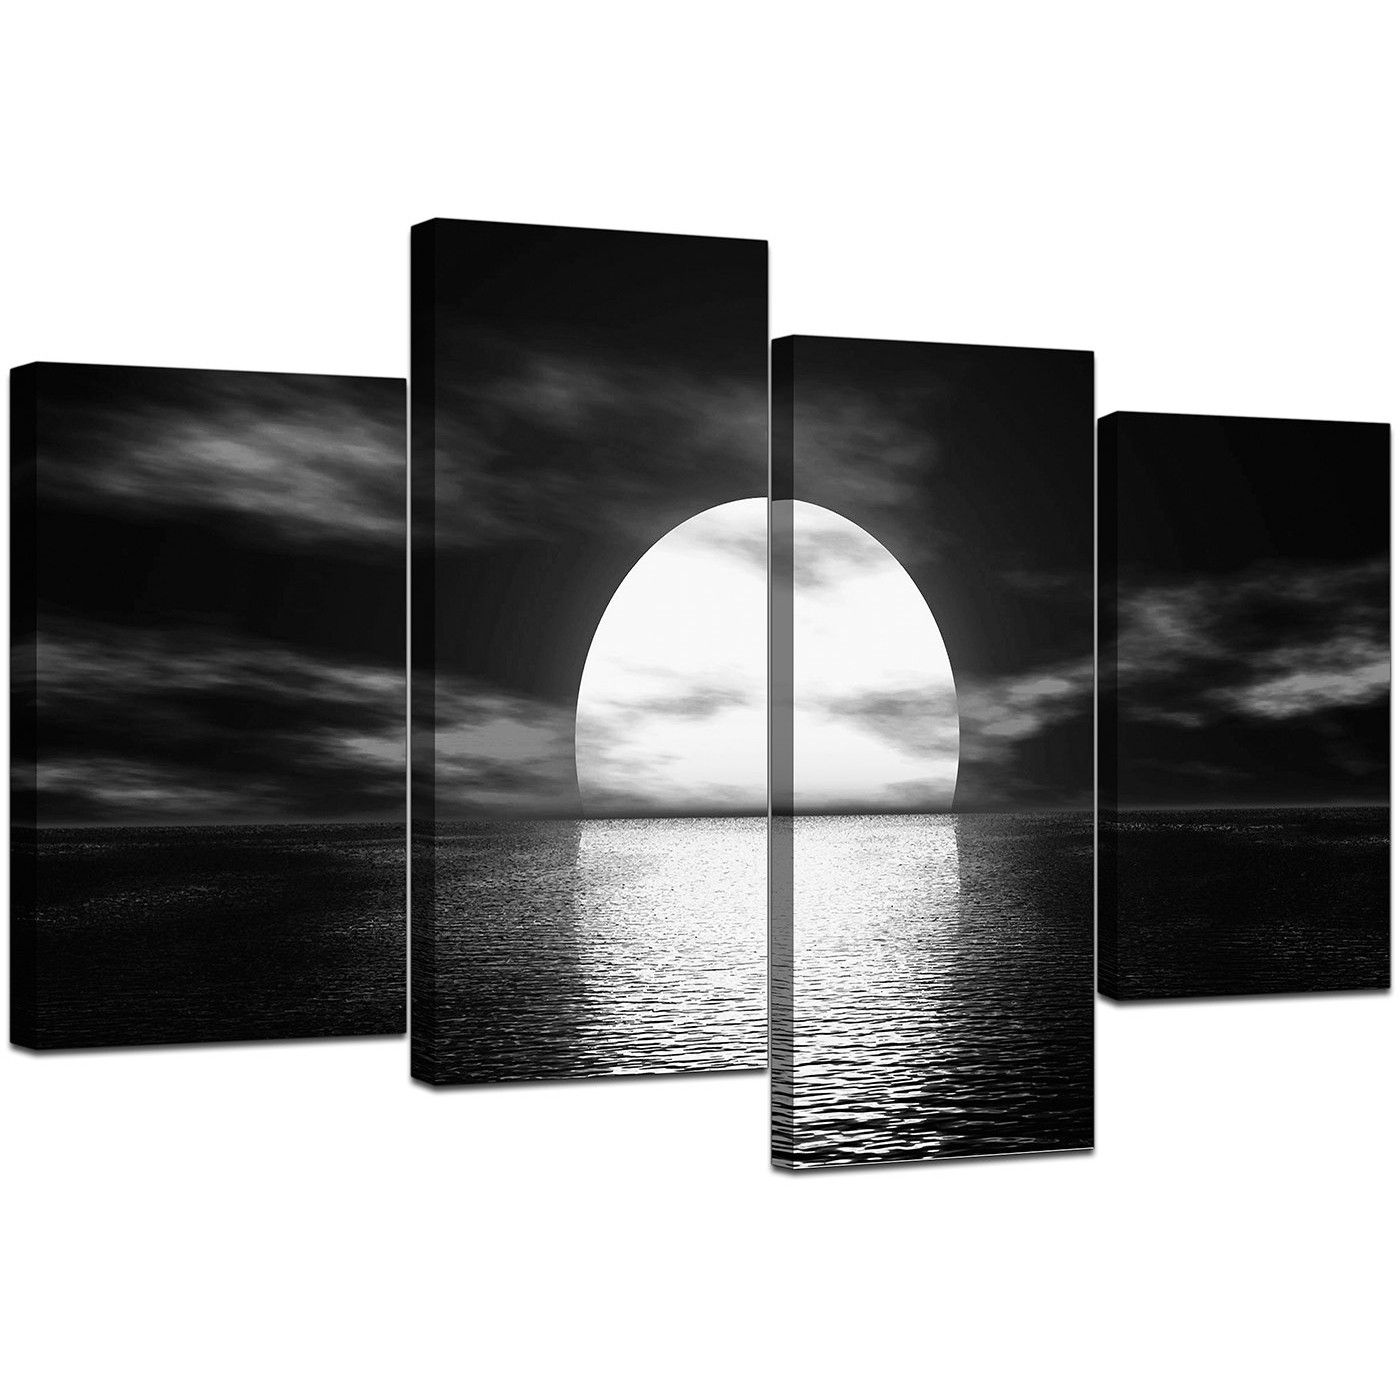 Black And White Canvas – Ocean Sunset Canvas Wall Art For Black And White Canvas Wall Art (View 1 of 20)